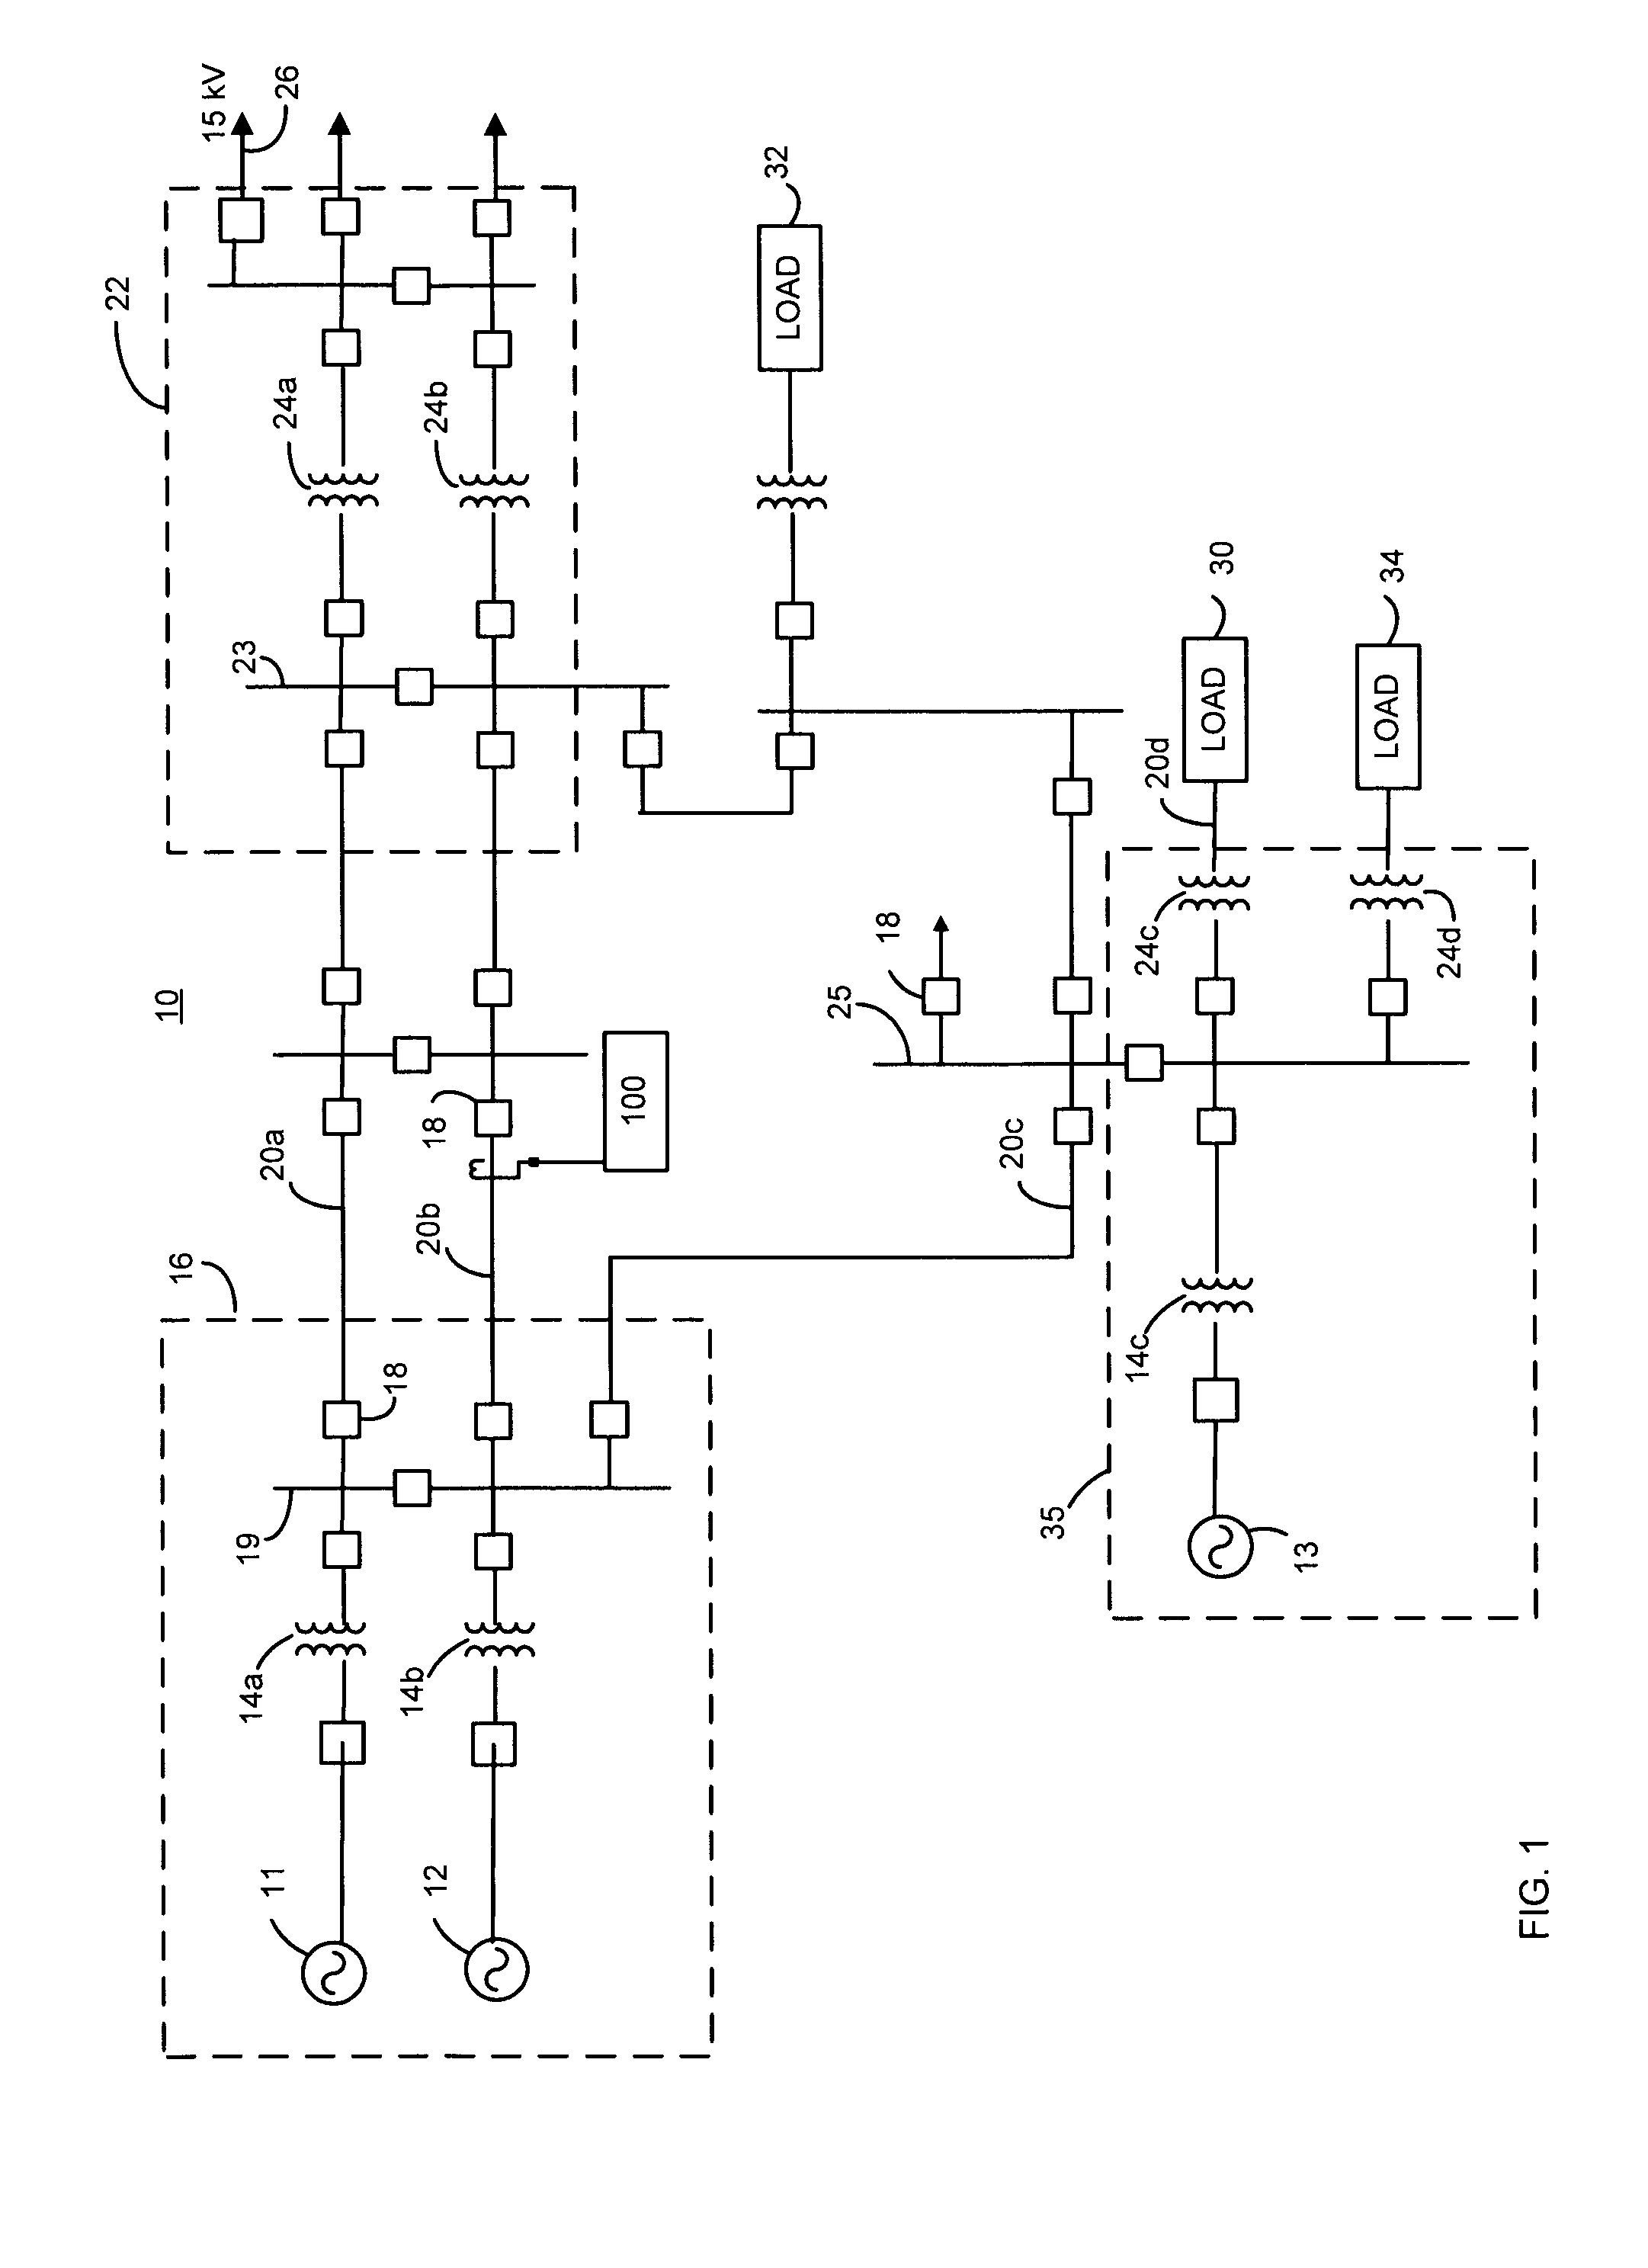 Apparatus and method for estimating synchronized phasors at predetermined times referenced to an absolute time standard in an electrical system